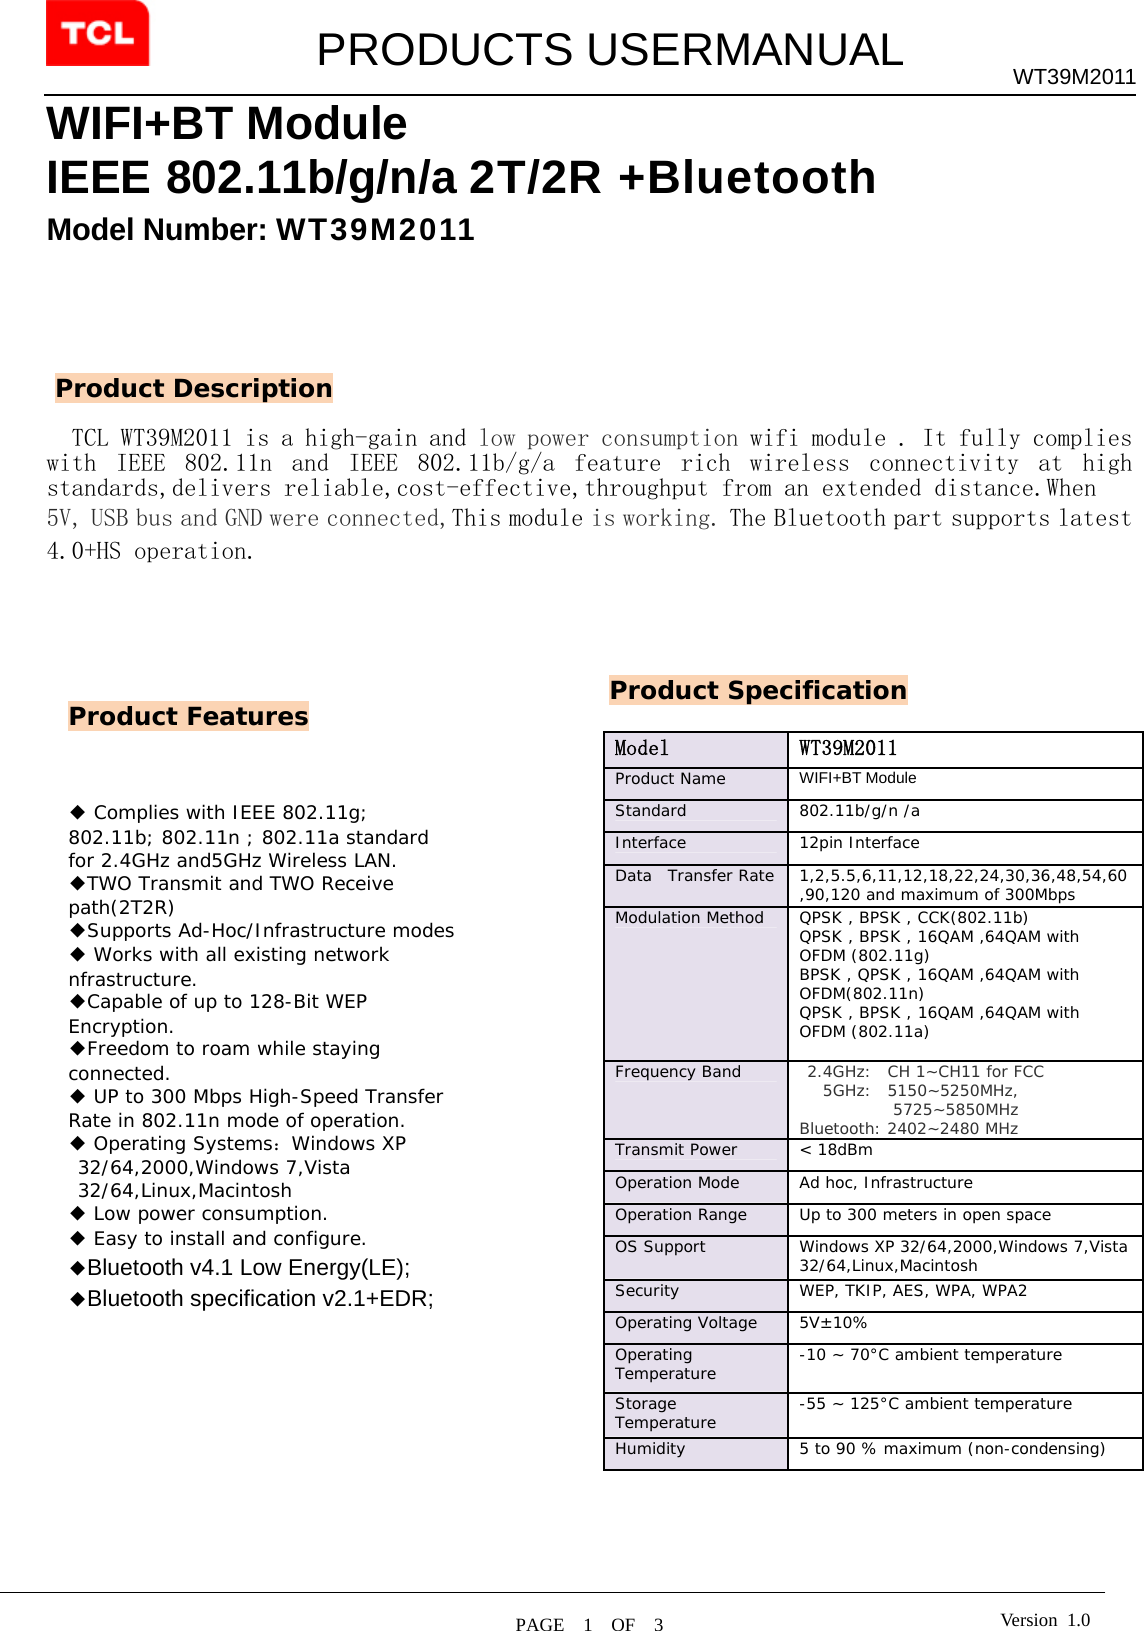         PRODUCTS USERMANUAL  PAGE  1  OF  3 WT39M2011 Version 1.0WIFI+BT Module IEEE 802.11b/g/n/a 2T/2R +Bluetooth Model Number: WT39M2011        TCL WT39M2011 is a high-gain and low power consumption wifi module . It fully complies with  IEEE  802.11n  and  IEEE  802.11b/g/a  feature  rich  wireless  connectivity  at  high standards,delivers reliable,cost-effective,throughput from an extended distance.When  5V, USB bus and GND were connected,This module is working. The Bluetooth part supports latest 4.0+HS operation.                                                                                                       Product Features Product Description ◆ Complies with IEEE 802.11g; 802.11b; 802.11n ; 802.11a standard for 2.4GHz and5GHz Wireless LAN. ◆TWO Transmit and TWO Receive path(2T2R) ◆Supports Ad-Hoc/Infrastructure modes ◆ Works with all existing network nfrastructure. ◆Capable of up to 128-Bit WEP Encryption. ◆Freedom to roam while staying connected. ◆ UP to 300 Mbps High-Speed Transfer Rate in 802.11n mode of operation. ◆ Operating Systems：Windows XP 32/64,2000,Windows 7,Vista 32/64,Linux,Macintosh ◆ Low power consumption. ◆ Easy to install and configure. ◆Bluetooth v4.1 Low Energy(LE); ◆Bluetooth specification v2.1+EDR;  Product Specification Model   WT39M2011 Product Name   WIFI+BT Module  Standard   802.11b/g/n /a Interface 12pin Interface Data  Transfer Rate  1,2,5.5,6,11,12,18,22,24,30,36,48,54,60,90,120 and maximum of 300Mbps  Modulation Method  QPSK , BPSK , CCK(802.11b) QPSK , BPSK , 16QAM ,64QAM with OFDM (802.11g) BPSK , QPSK , 16QAM ,64QAM with OFDM(802.11n) QPSK , BPSK , 16QAM ,64QAM with OFDM (802.11a)  Frequency Band    2.4GHz:  CH 1~CH11 for FCC    5GHz:  5150~5250MHz, 5725~5850MHz Bluetooth: 2402~2480 MHz Transmit Power  &lt; 18dBm  Operation Mode   Ad hoc, Infrastructure  Operation Range   Up to 300 meters in open space  OS Support   Windows XP 32/64,2000,Windows 7,Vista 32/64,Linux,Macintosh Security   WEP, TKIP, AES, WPA, WPA2  Operating Voltage  5V±10% Operating Temperature   -10 ~ 70°C ambient temperature  Storage Temperature   -55 ~ 125°C ambient temperature  Humidity   5 to 90 % maximum (non-condensing)   